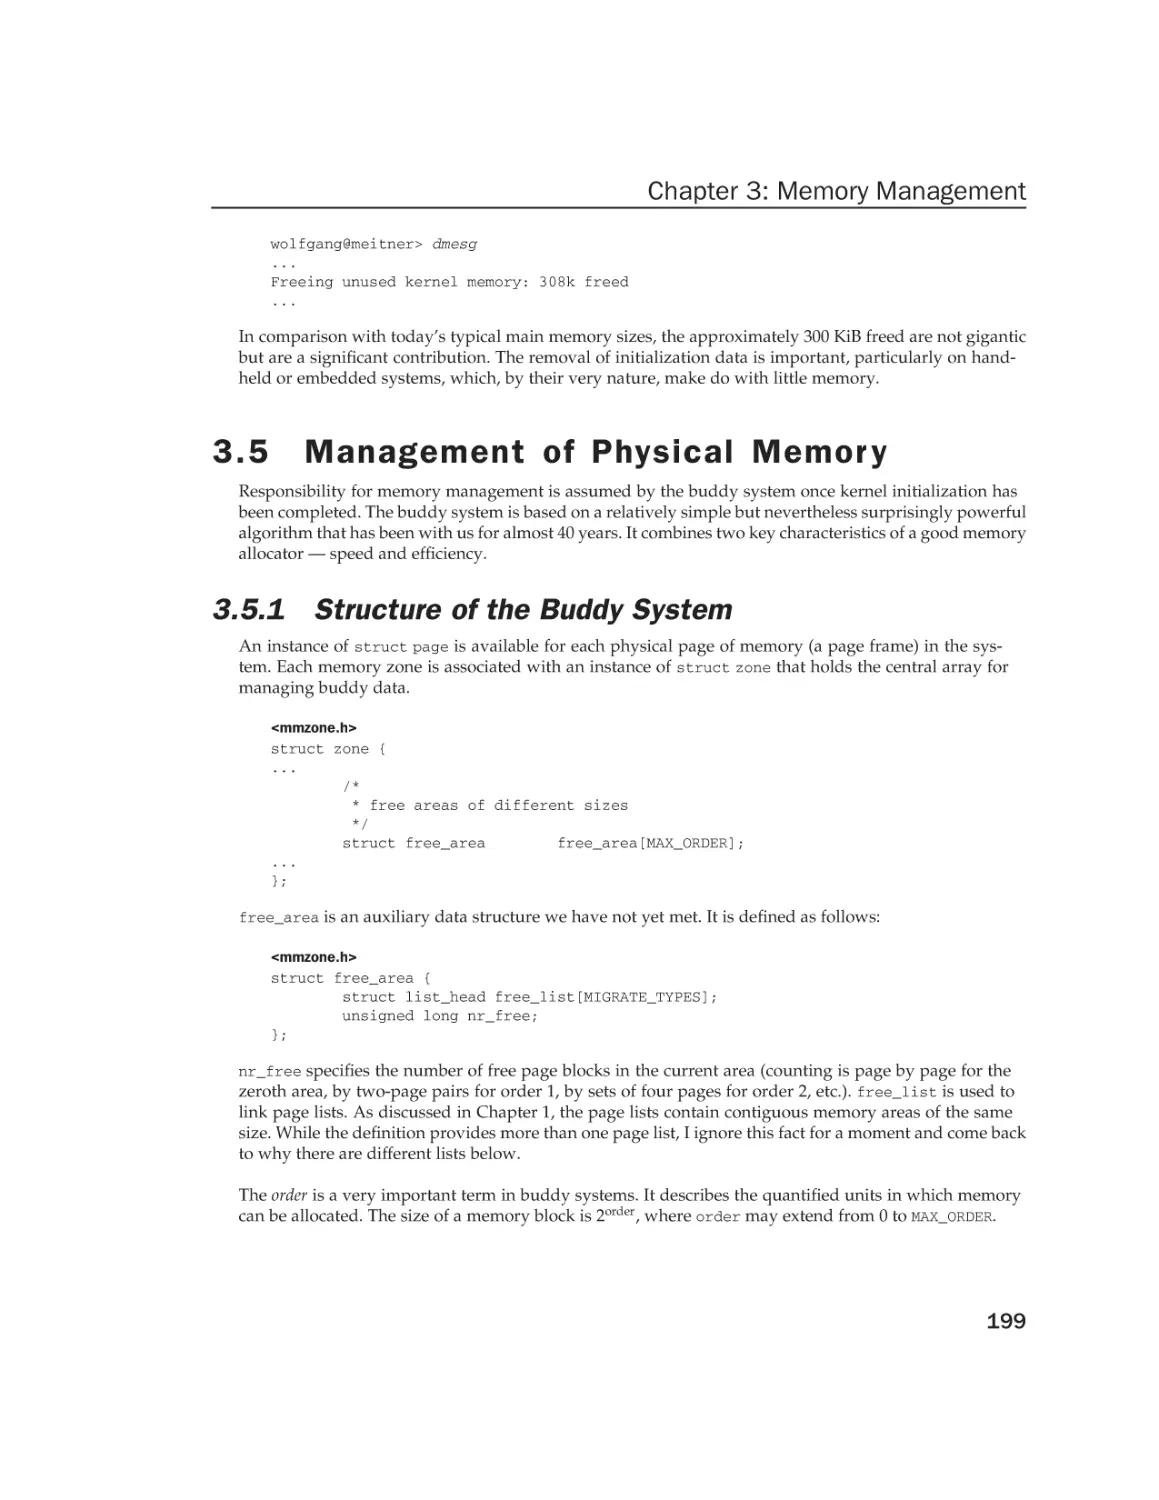 3.5 Management of Physical Memory